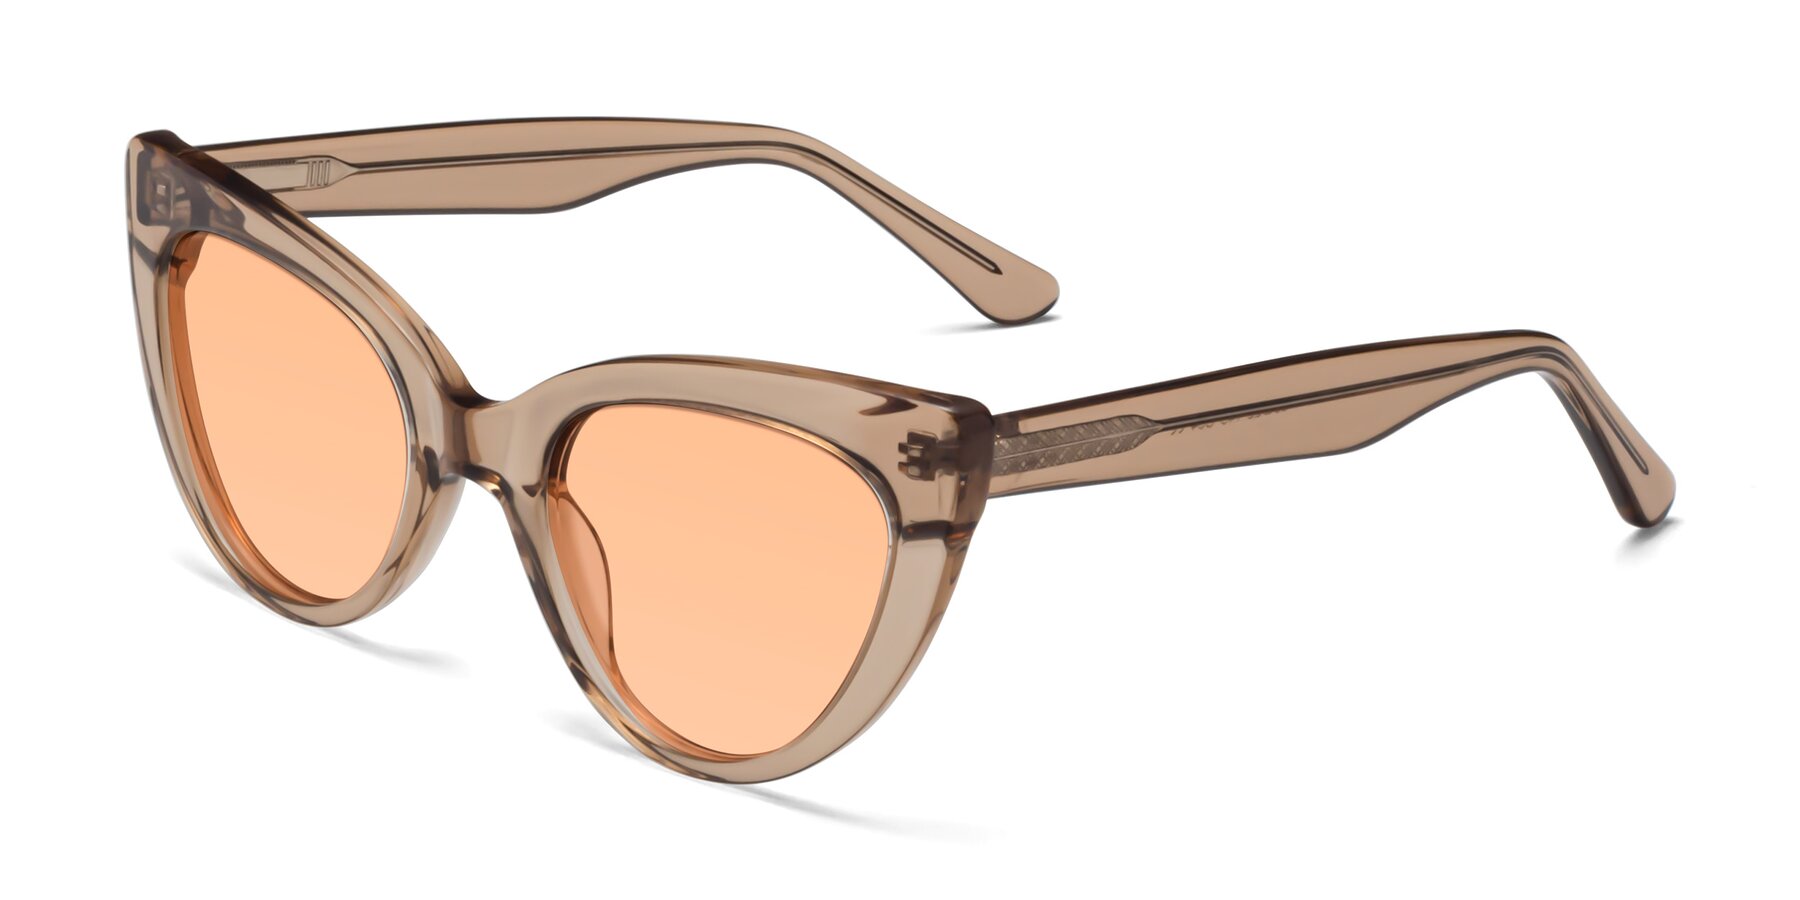 Angle of Tiesi in Caramel with Light Orange Tinted Lenses